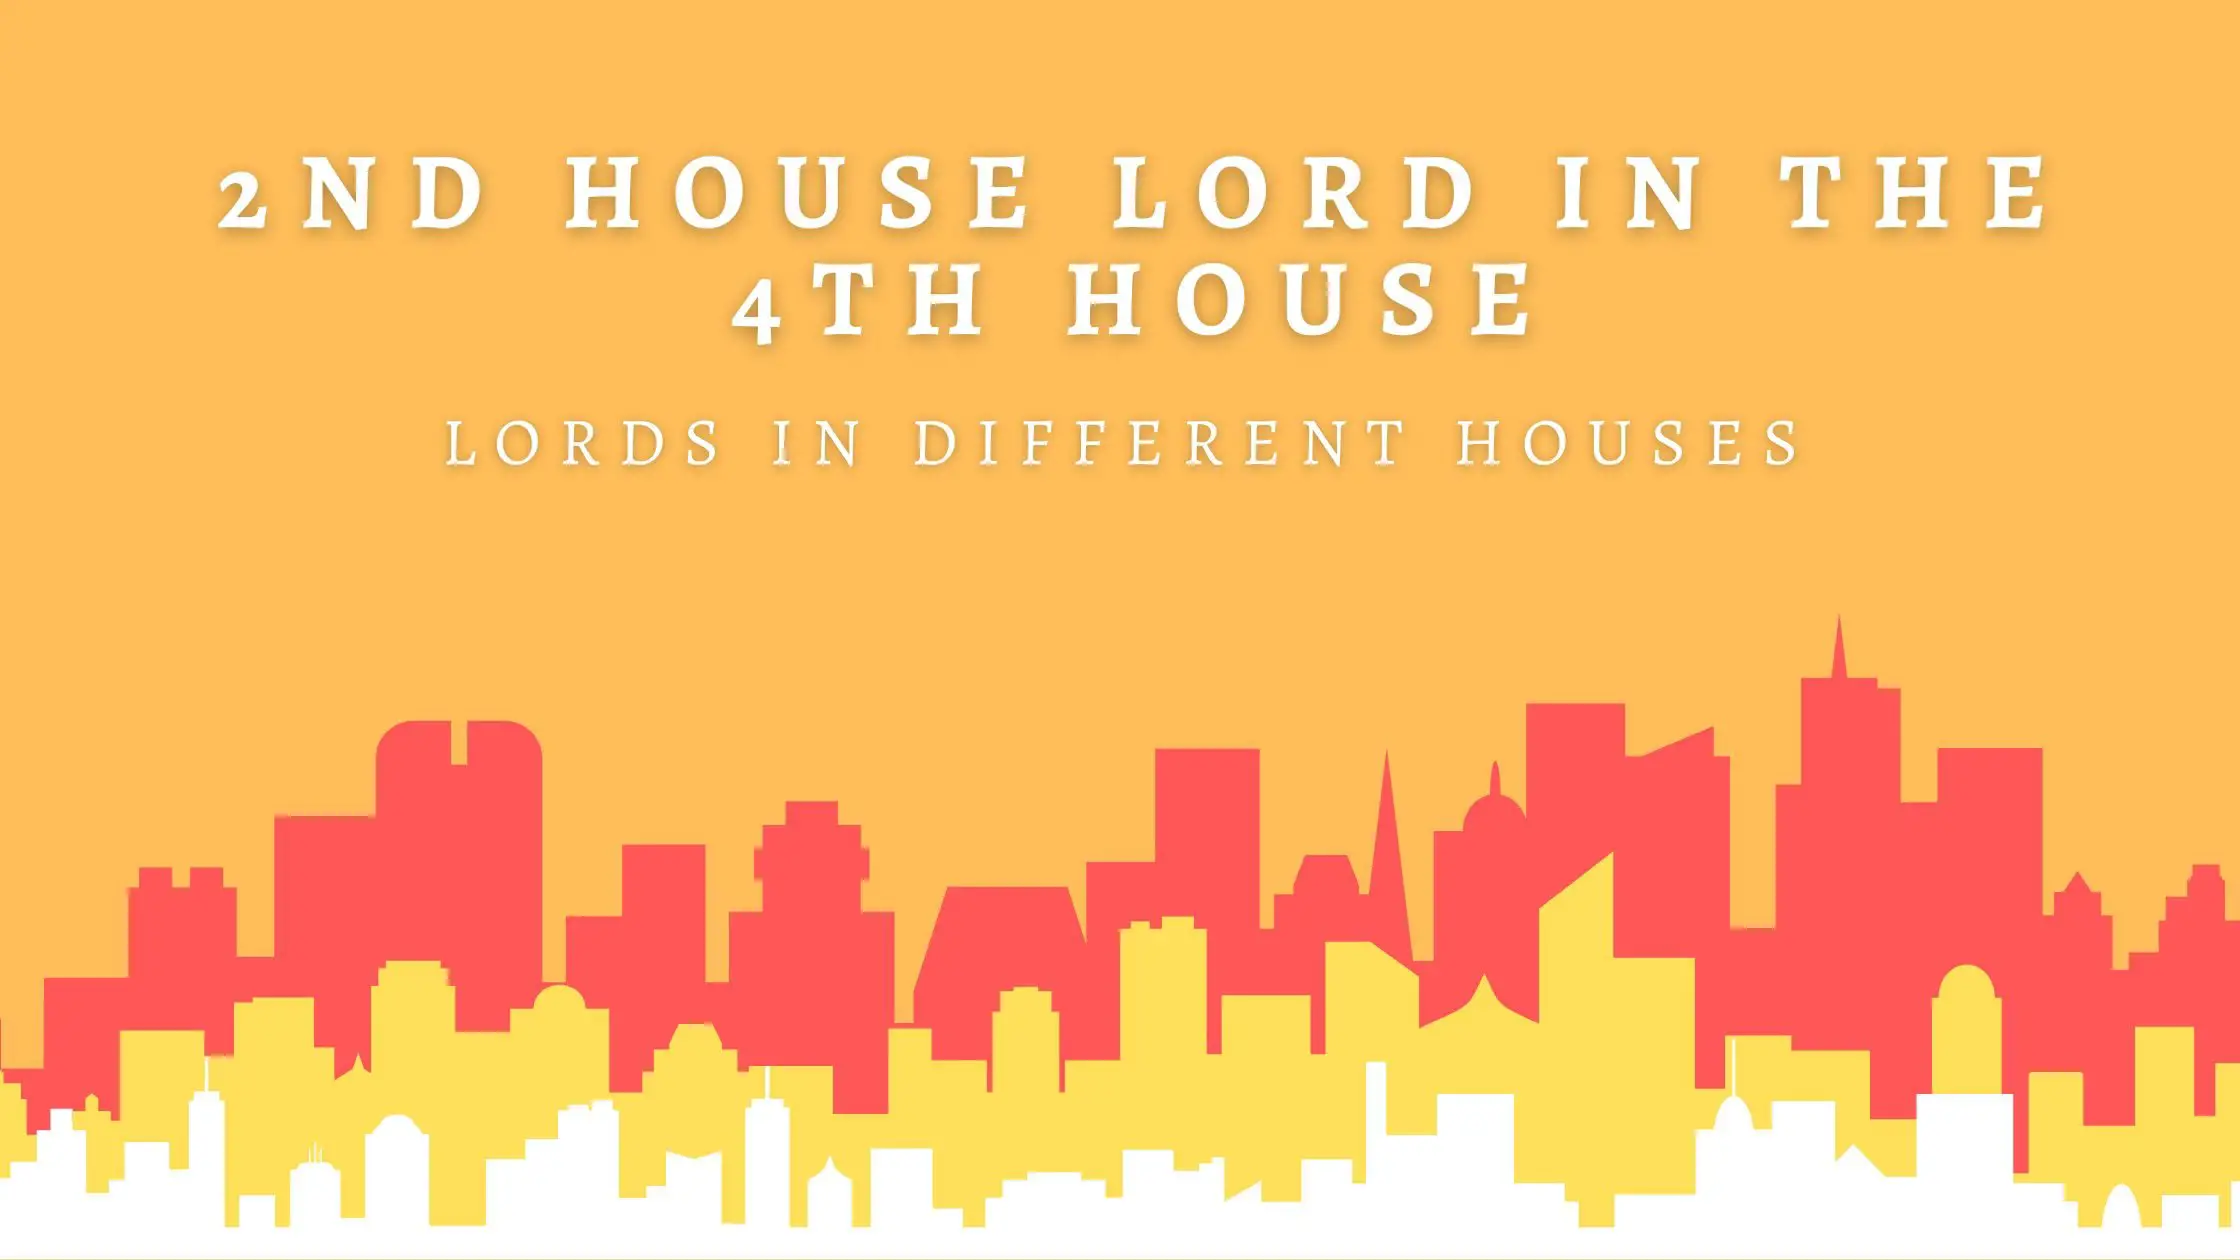 2nd house lord in the 4th house